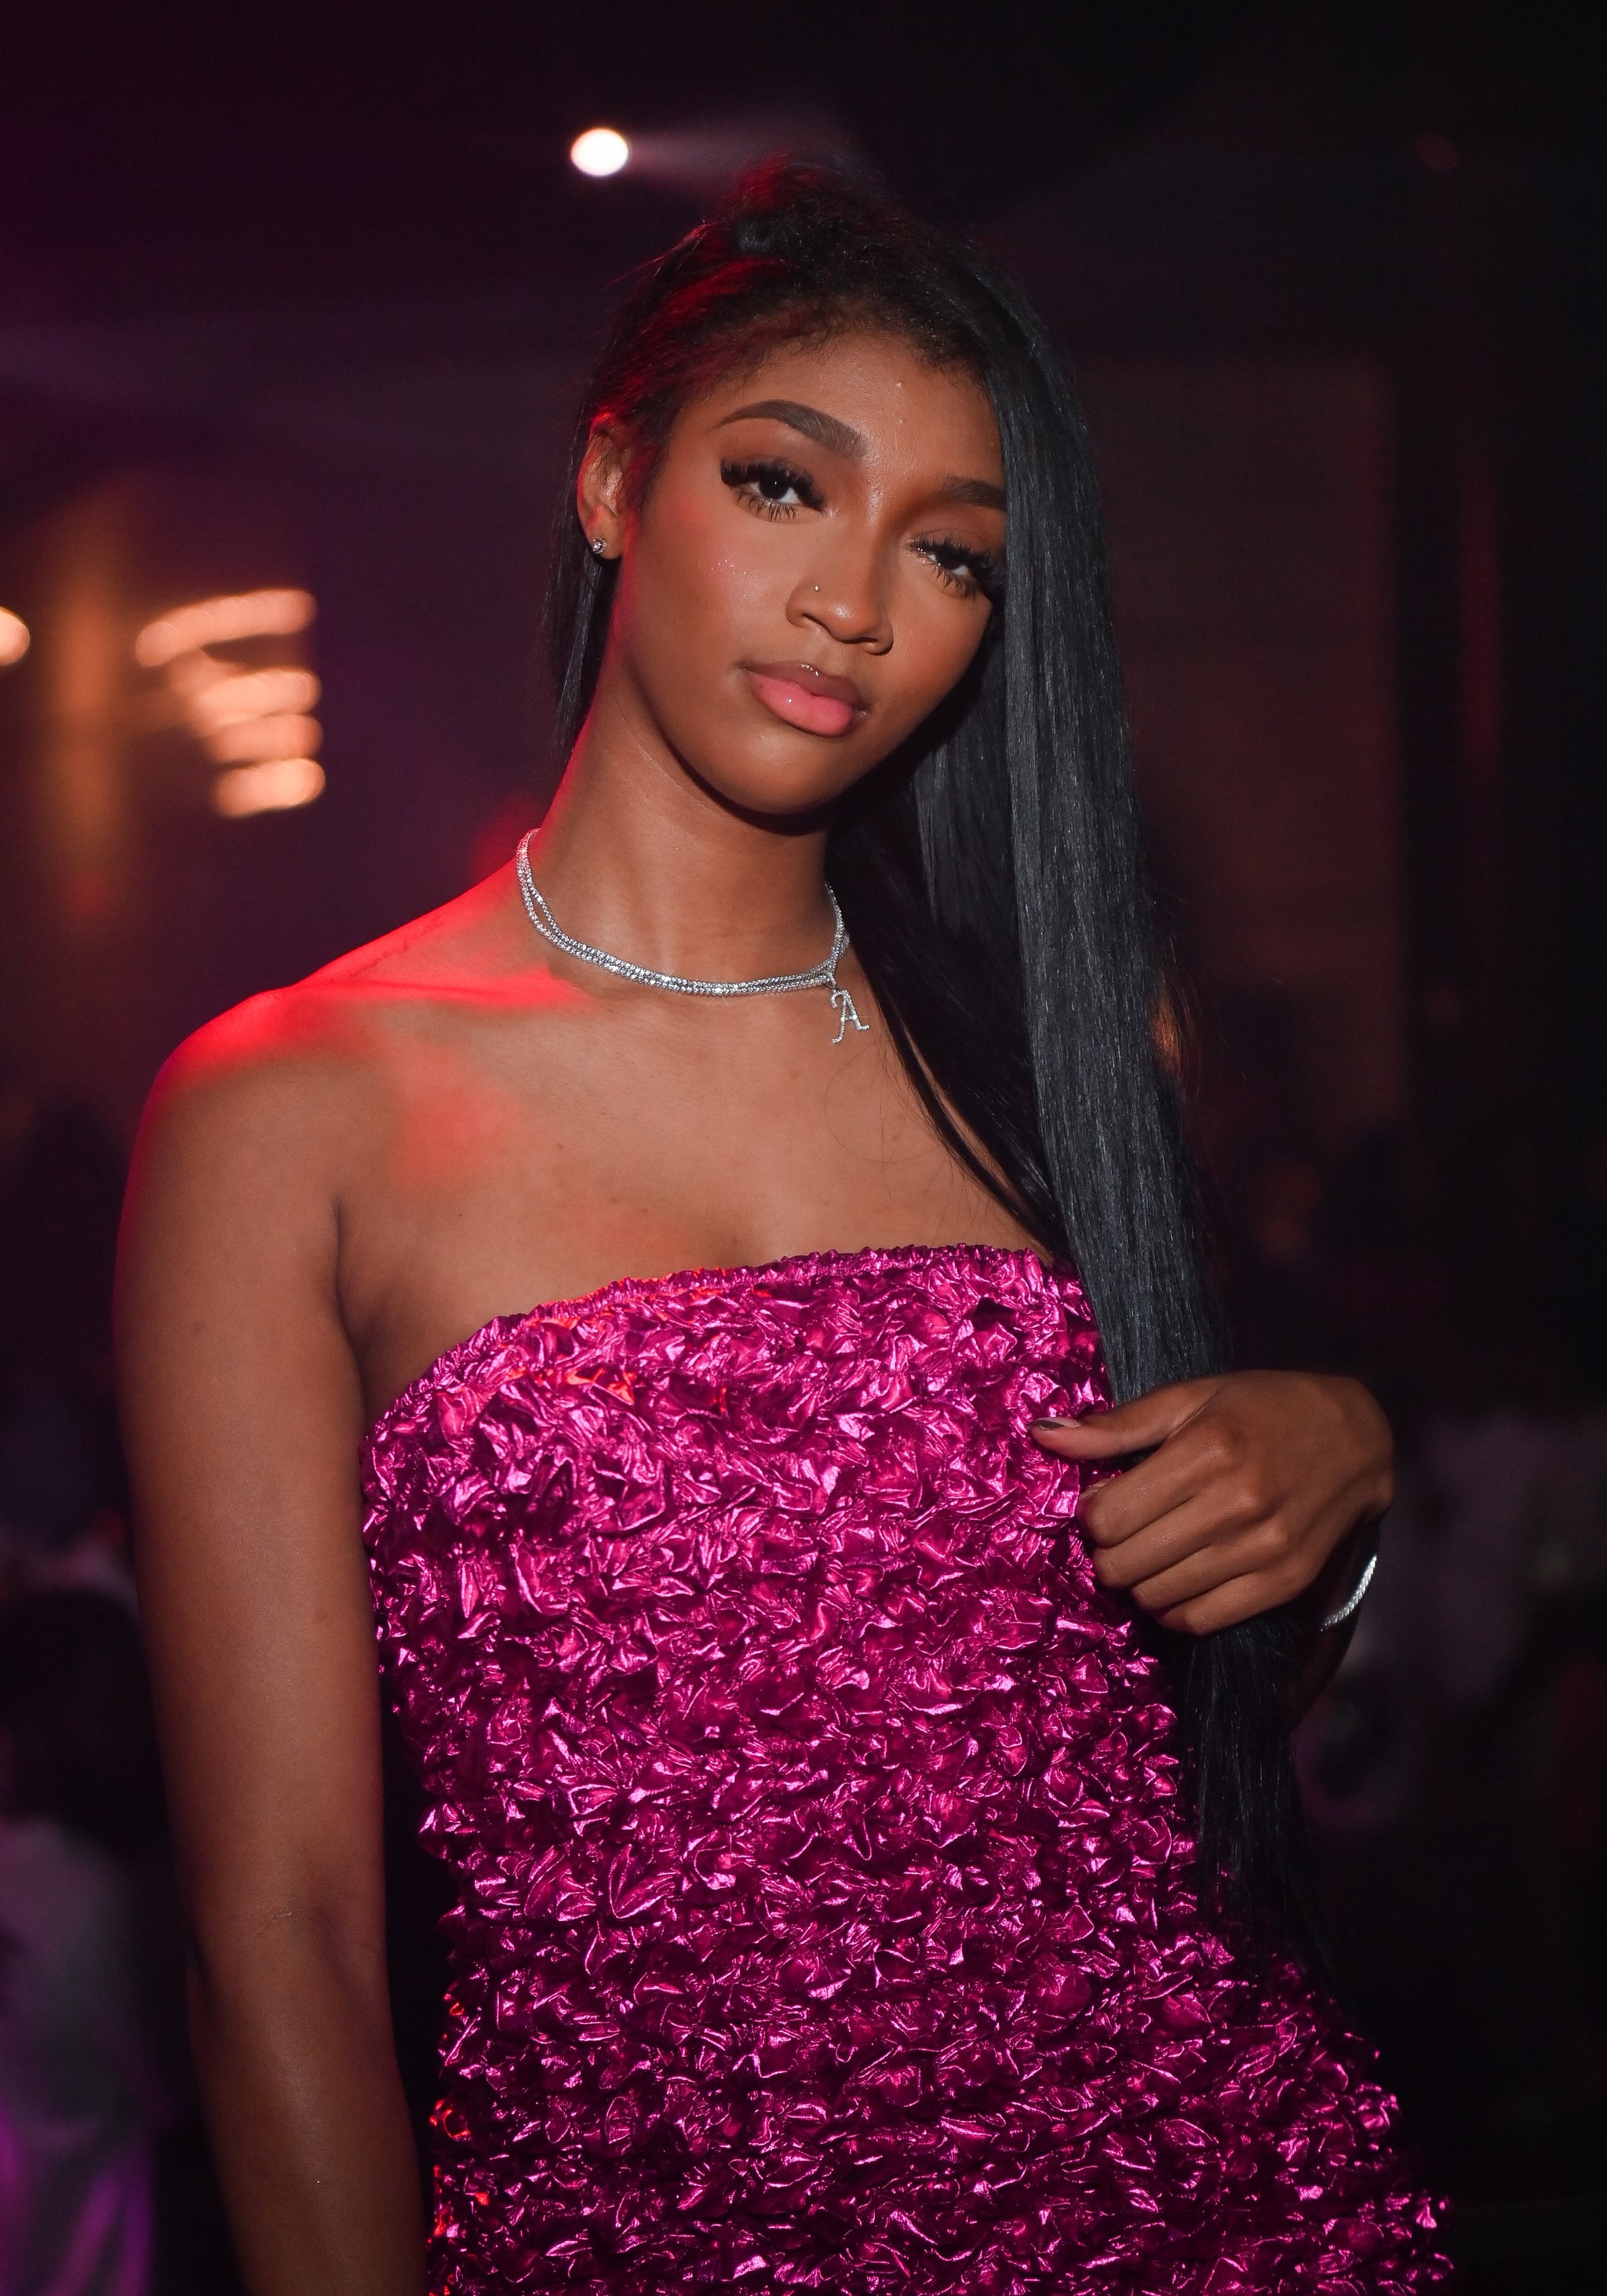 ATLANTA, GEORGIA - MAY 6: Angel Reese attends her 21st Birthday Celebration at Revel on May 6, 2023 in Atlanta, Georgia. (Photo by Prince Williams/WireImage)